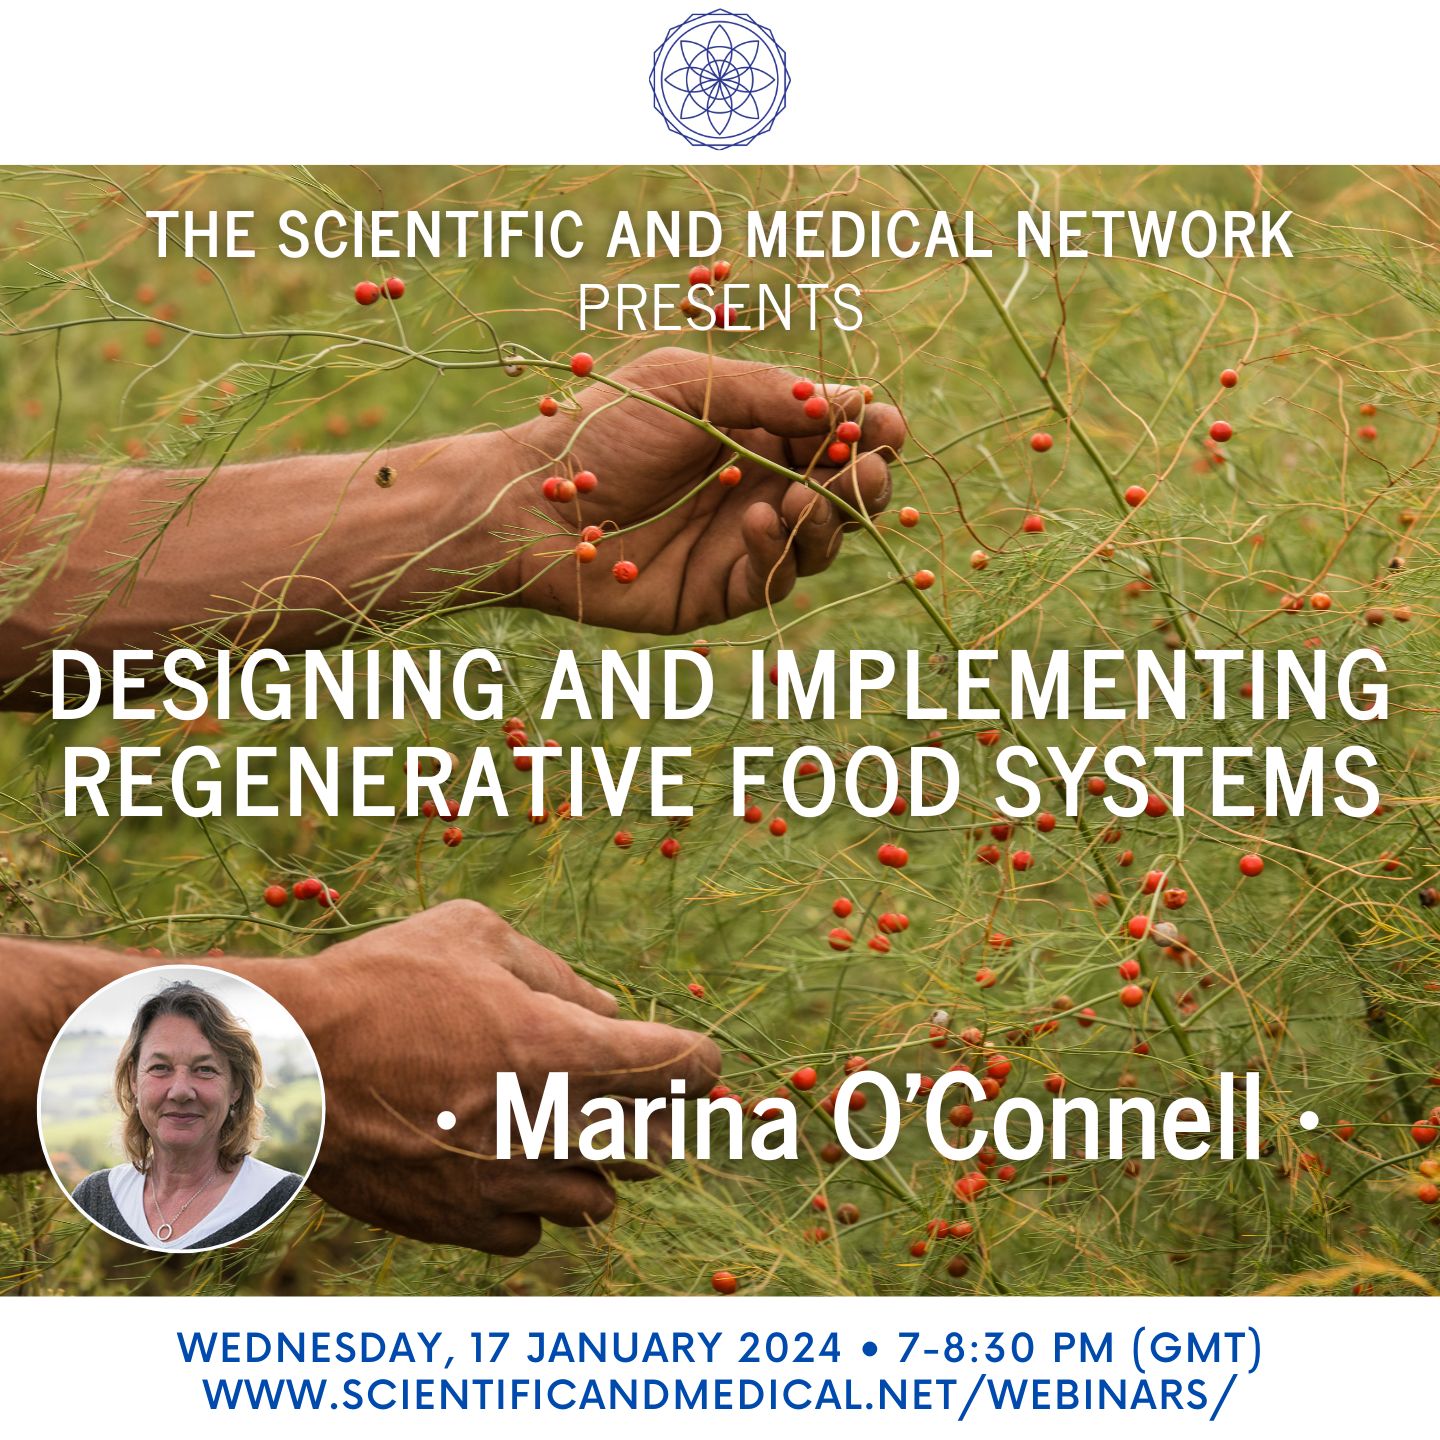 Marina OConnell – Designing and Implementing Regenerative Food Systems